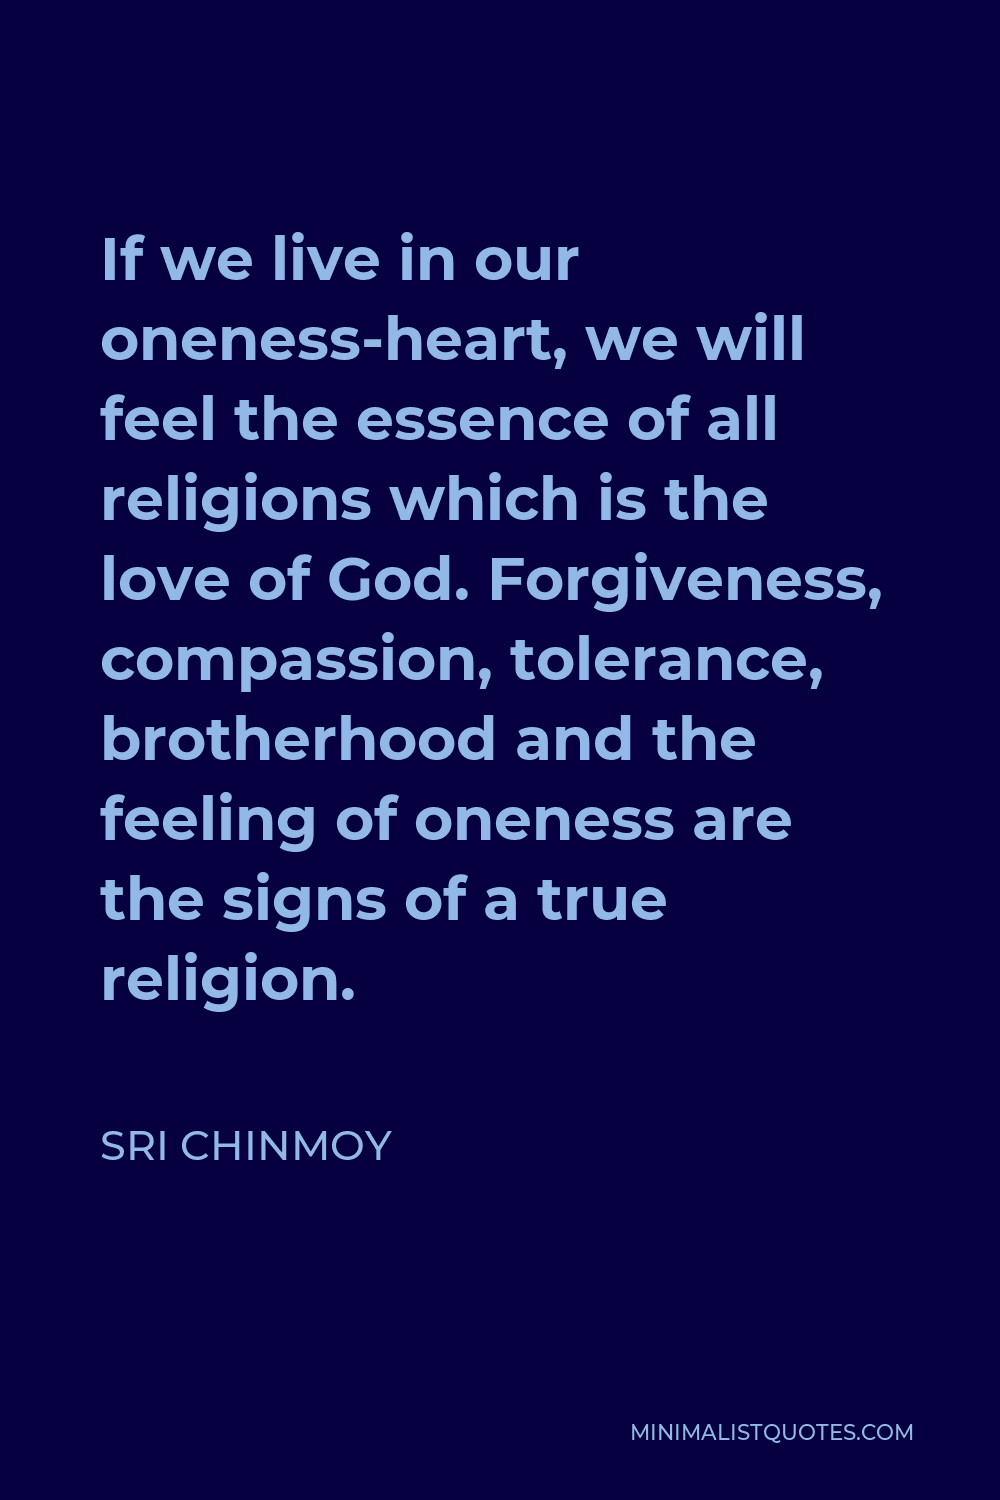 Sri Chinmoy Quote - If we live in our oneness-heart, we will feel the essence of all religions which is the love of God. Forgiveness, compassion, tolerance, brotherhood and the feeling of oneness are the signs of a true religion.